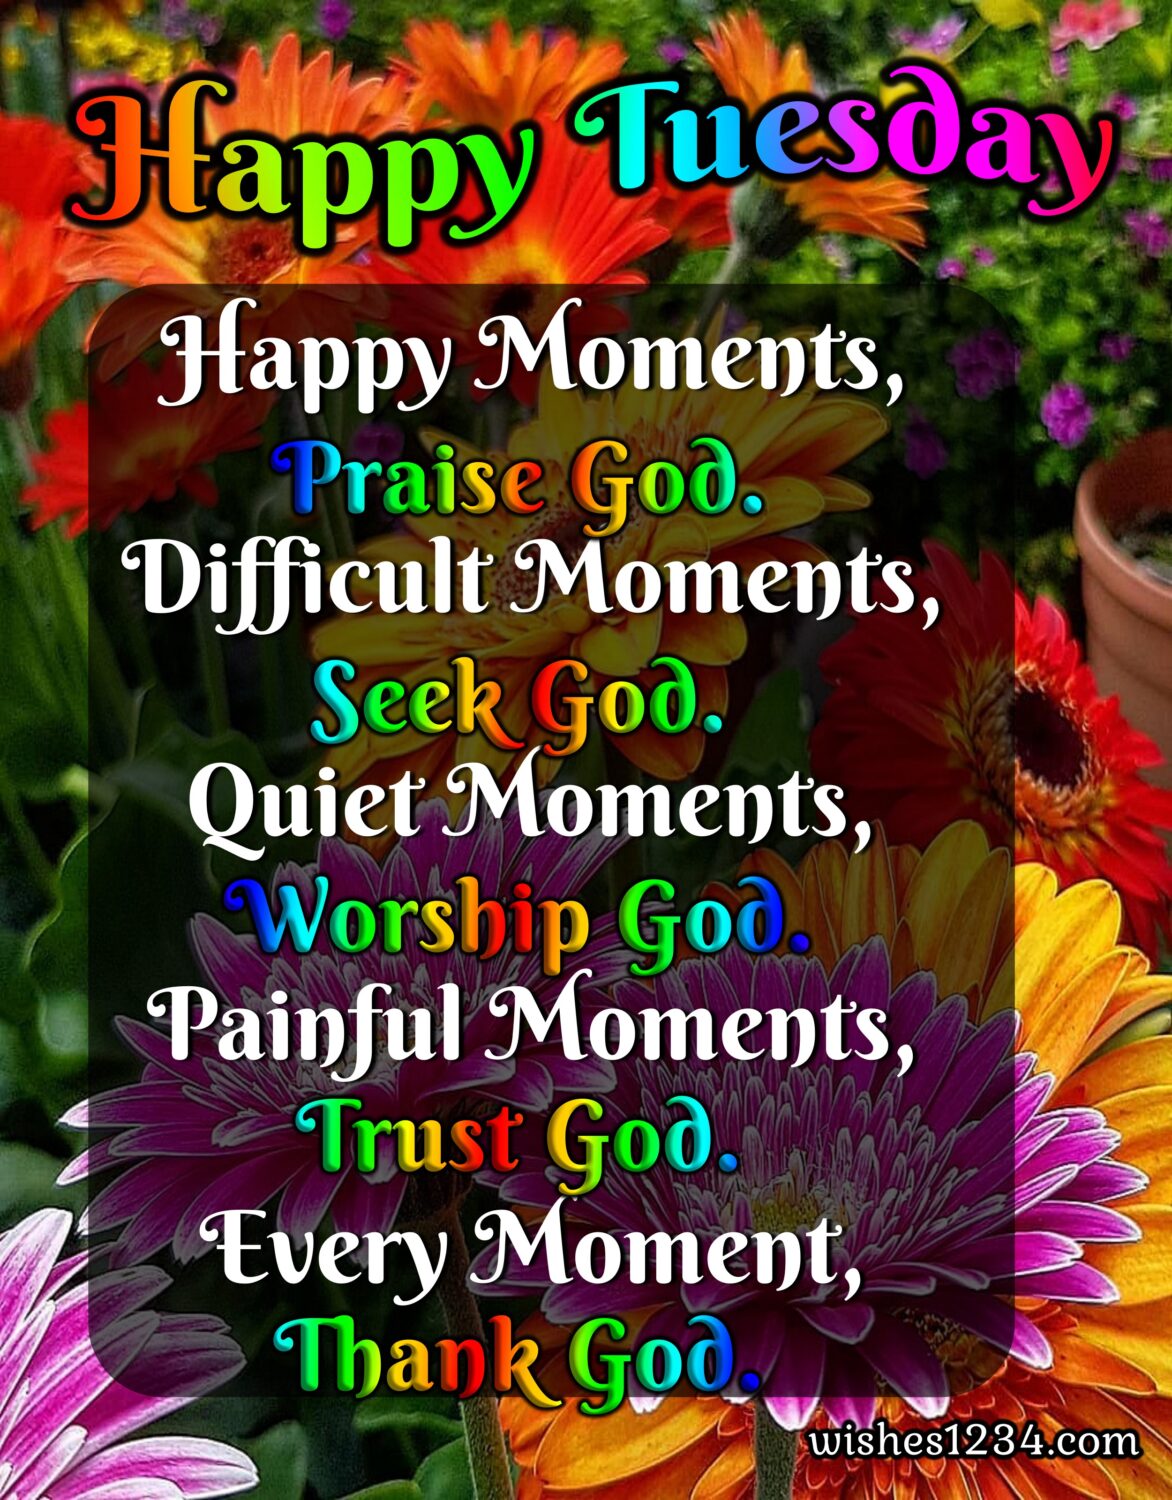 Tuesday quotes with flowers background, Happy Tuesday Quotes.